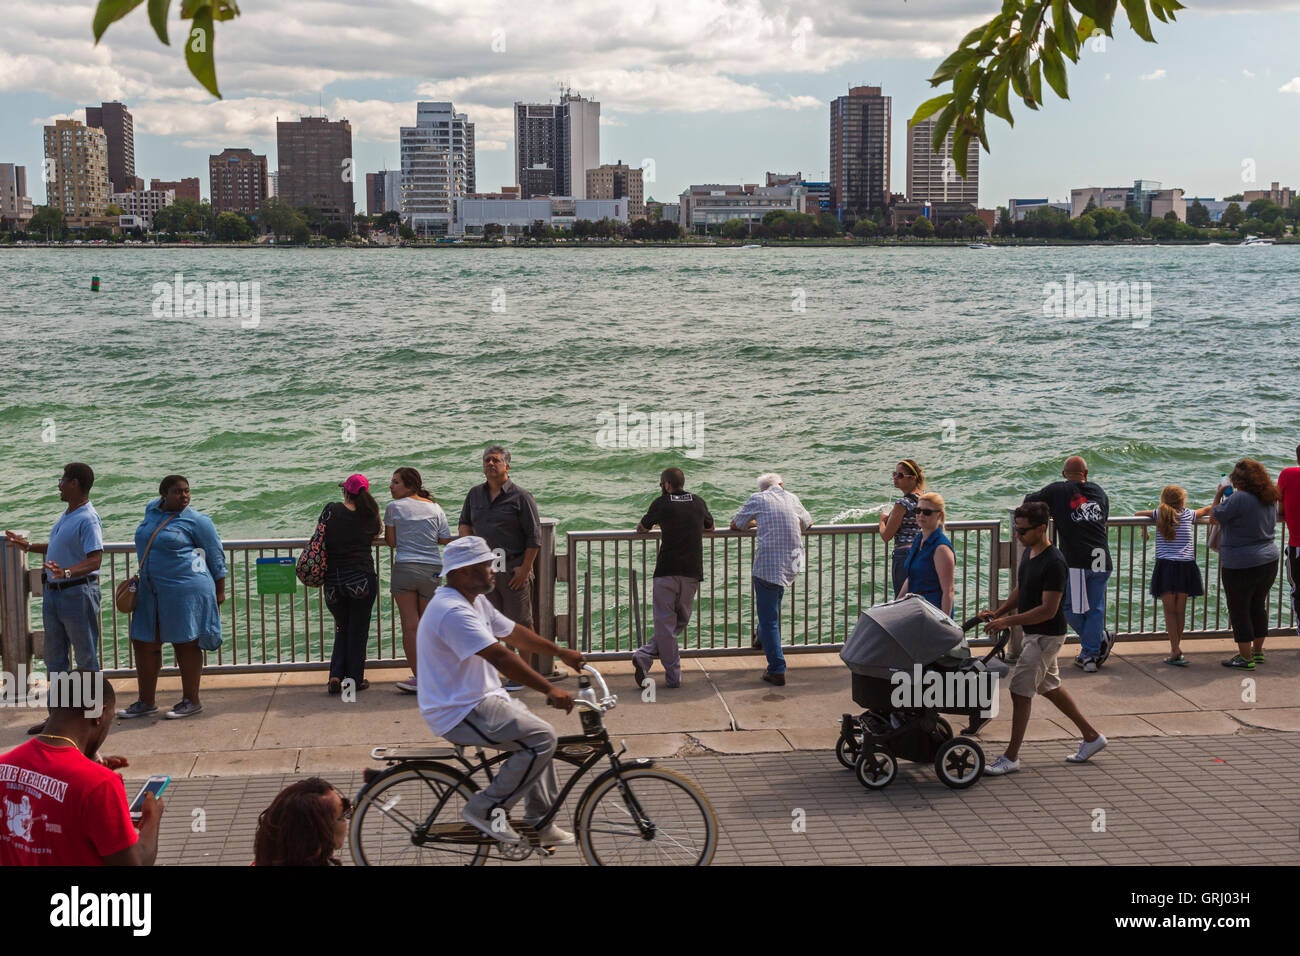 Detroit, Michigan - People on the Detroit Riverwalk on a Sunday afternoon. Windsor, Ontario is across the Detroit River. Stock Photo